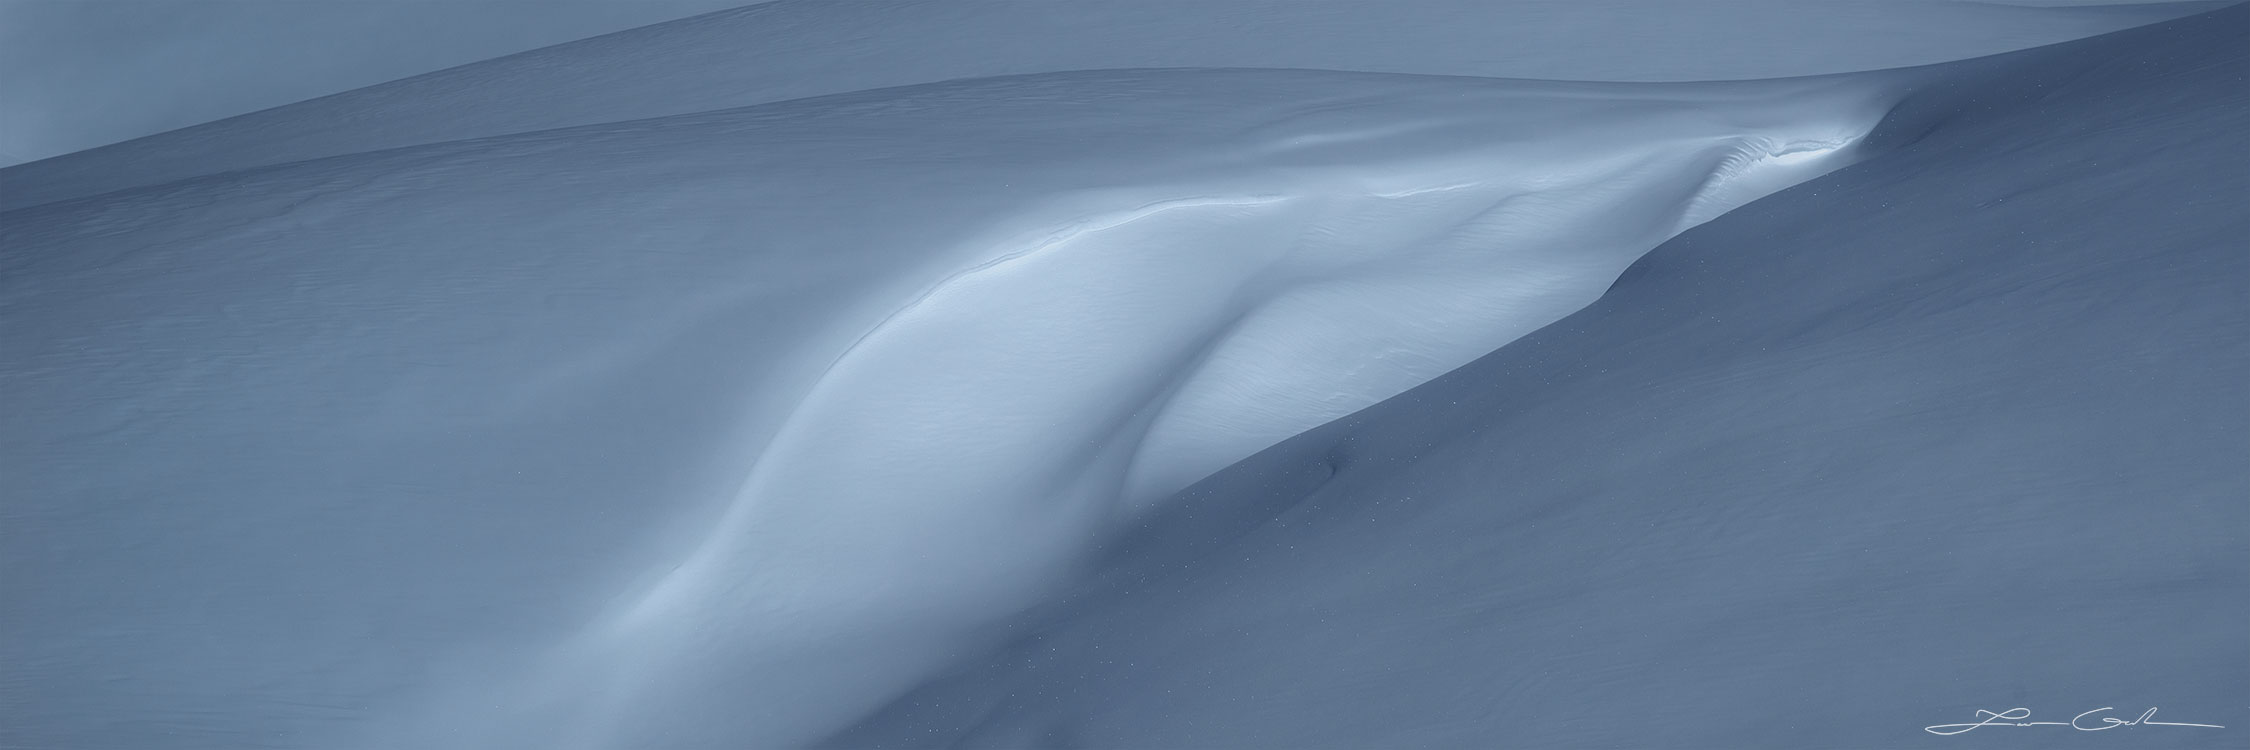 Abstract winter light on wind-swept snow formations during winter - Gintchin Fine Art